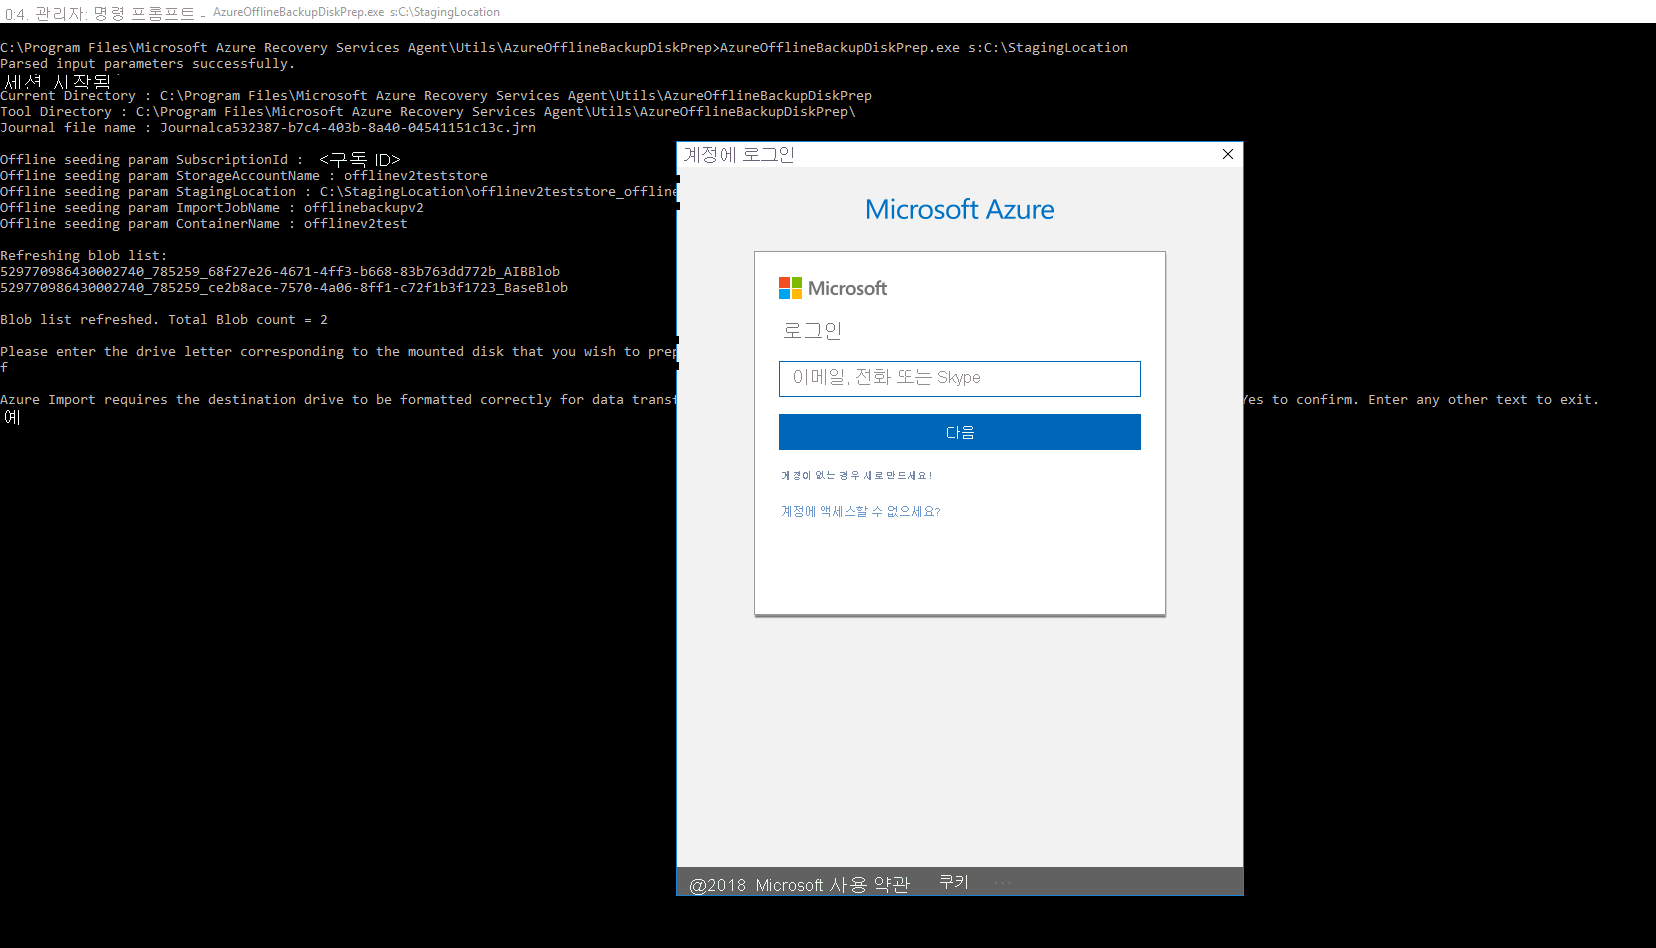 Screenshot shows the Azure subscription sign-in process.